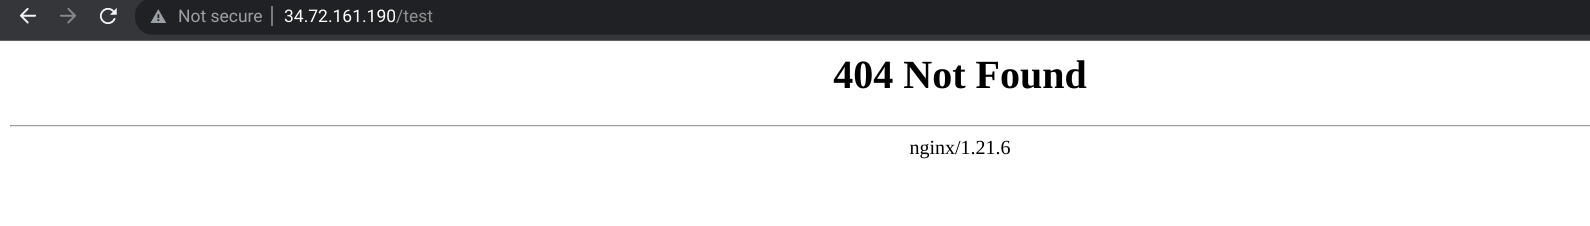 Hello page displaying 404 Not Found error message